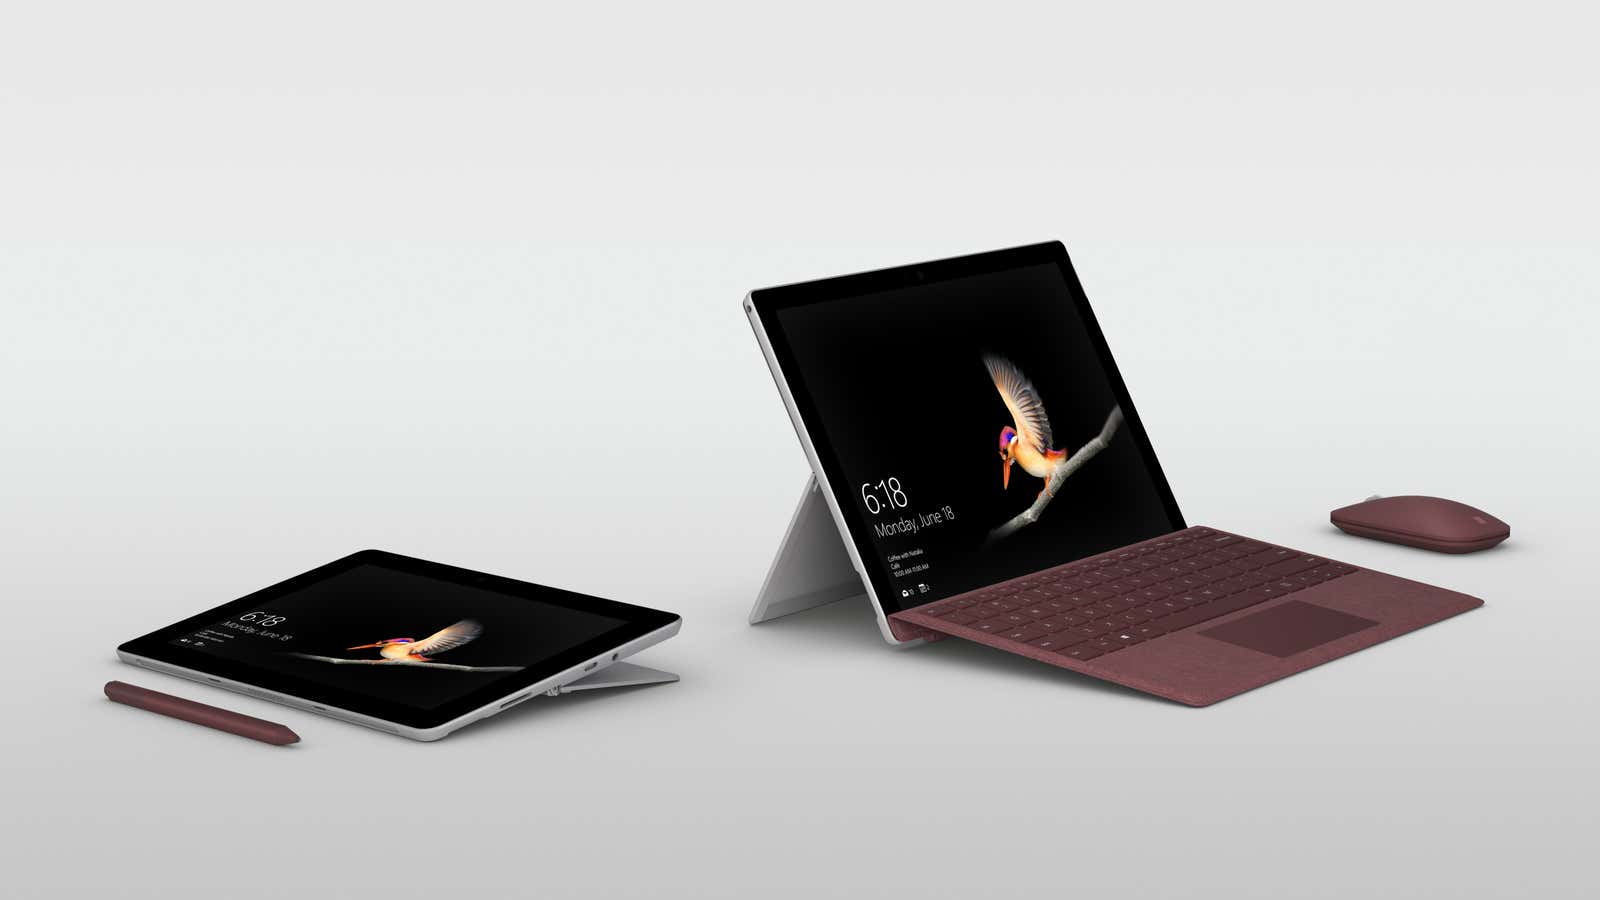 The Surface Go is undoubtedly a smaller Surface device.